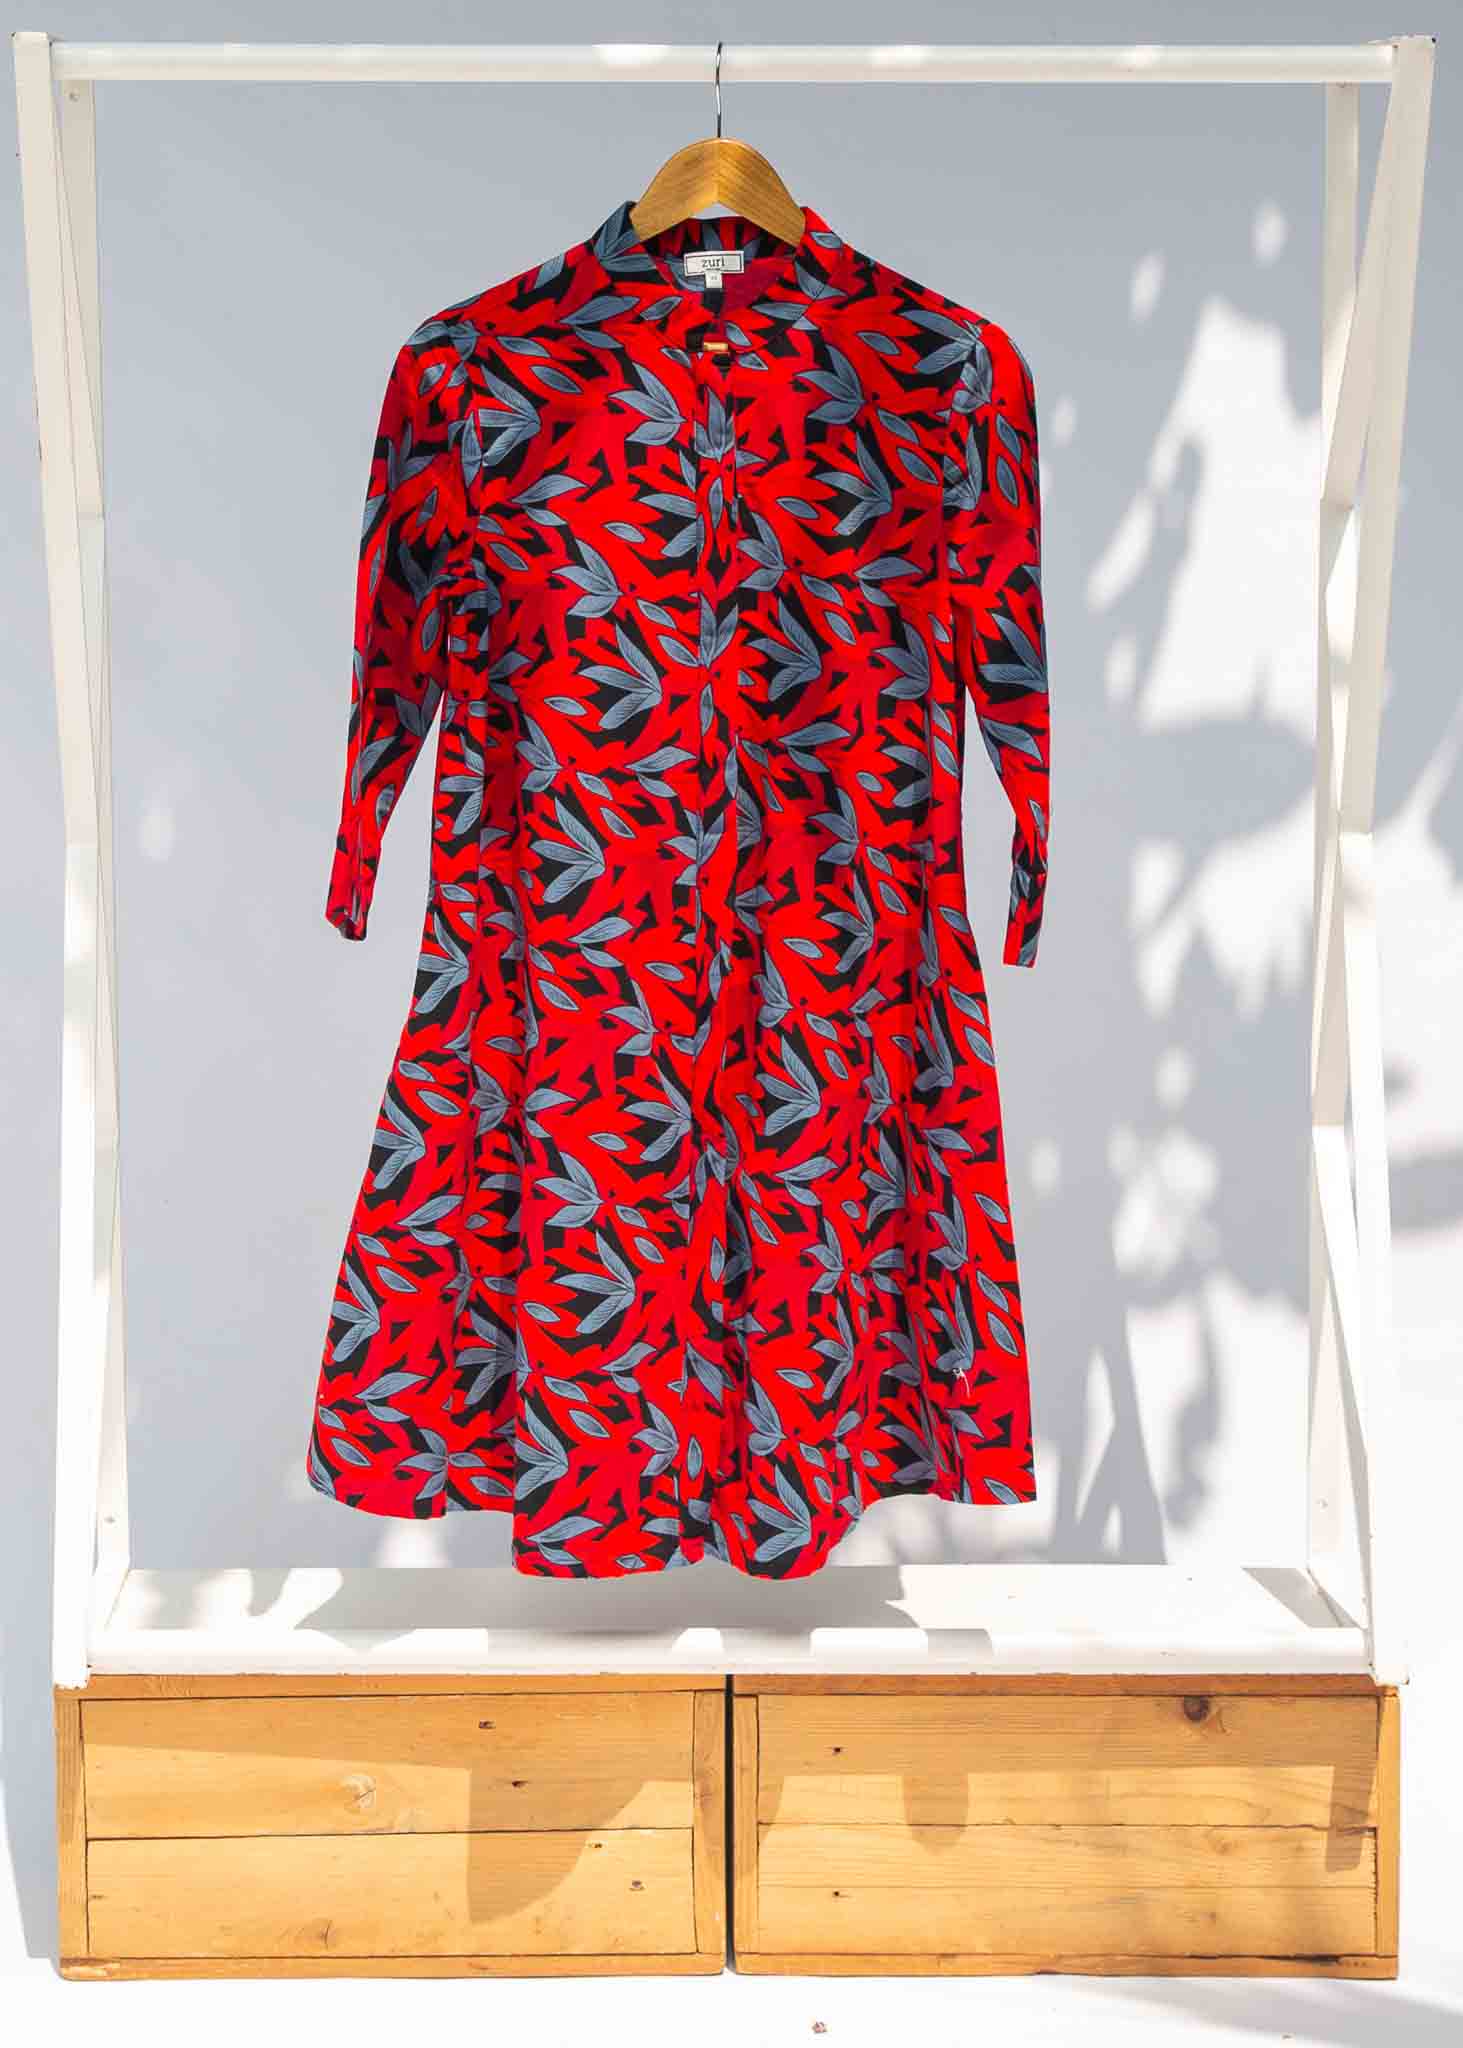 Display of red, black and gray leaf print dress.